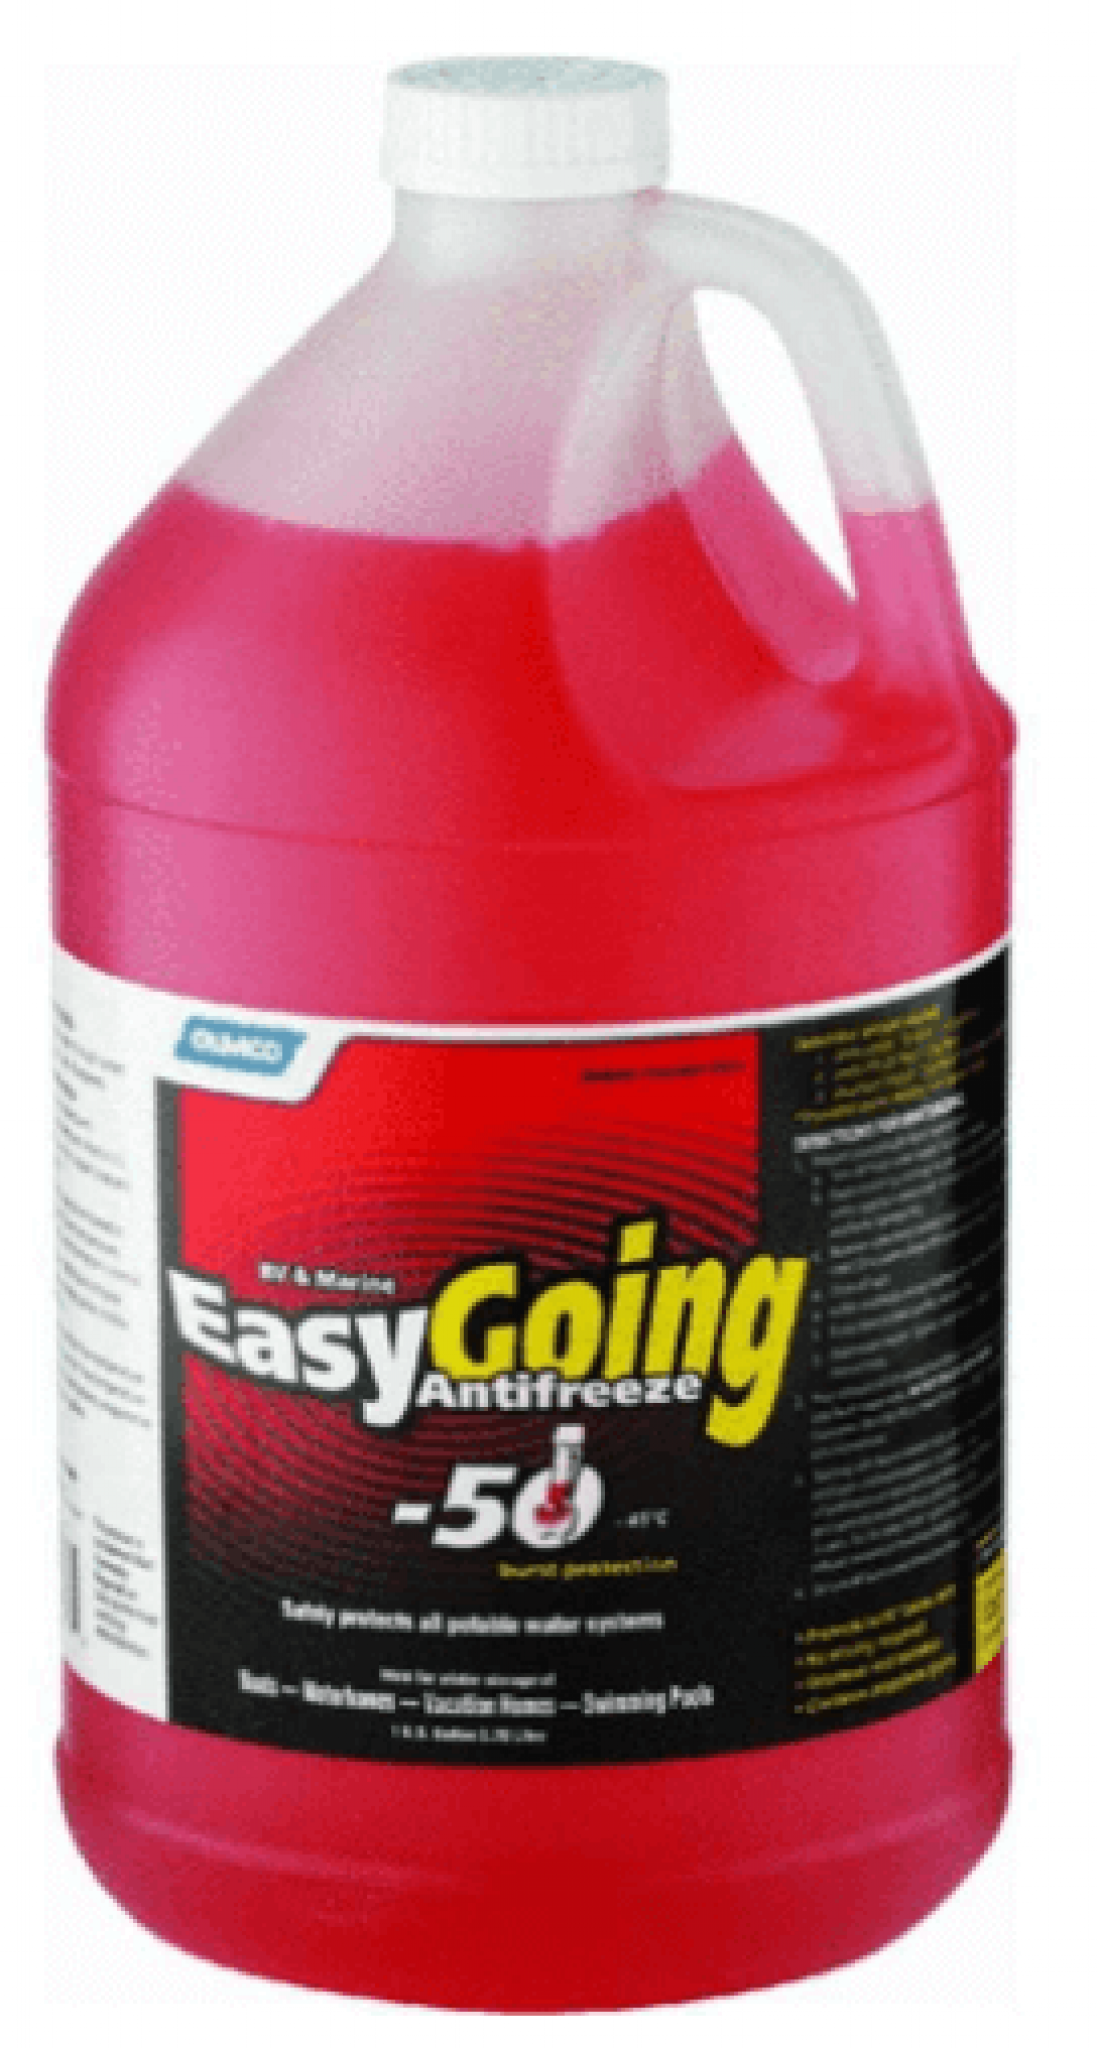 How Many Gallons Of Antifreeze To Winterize Rv